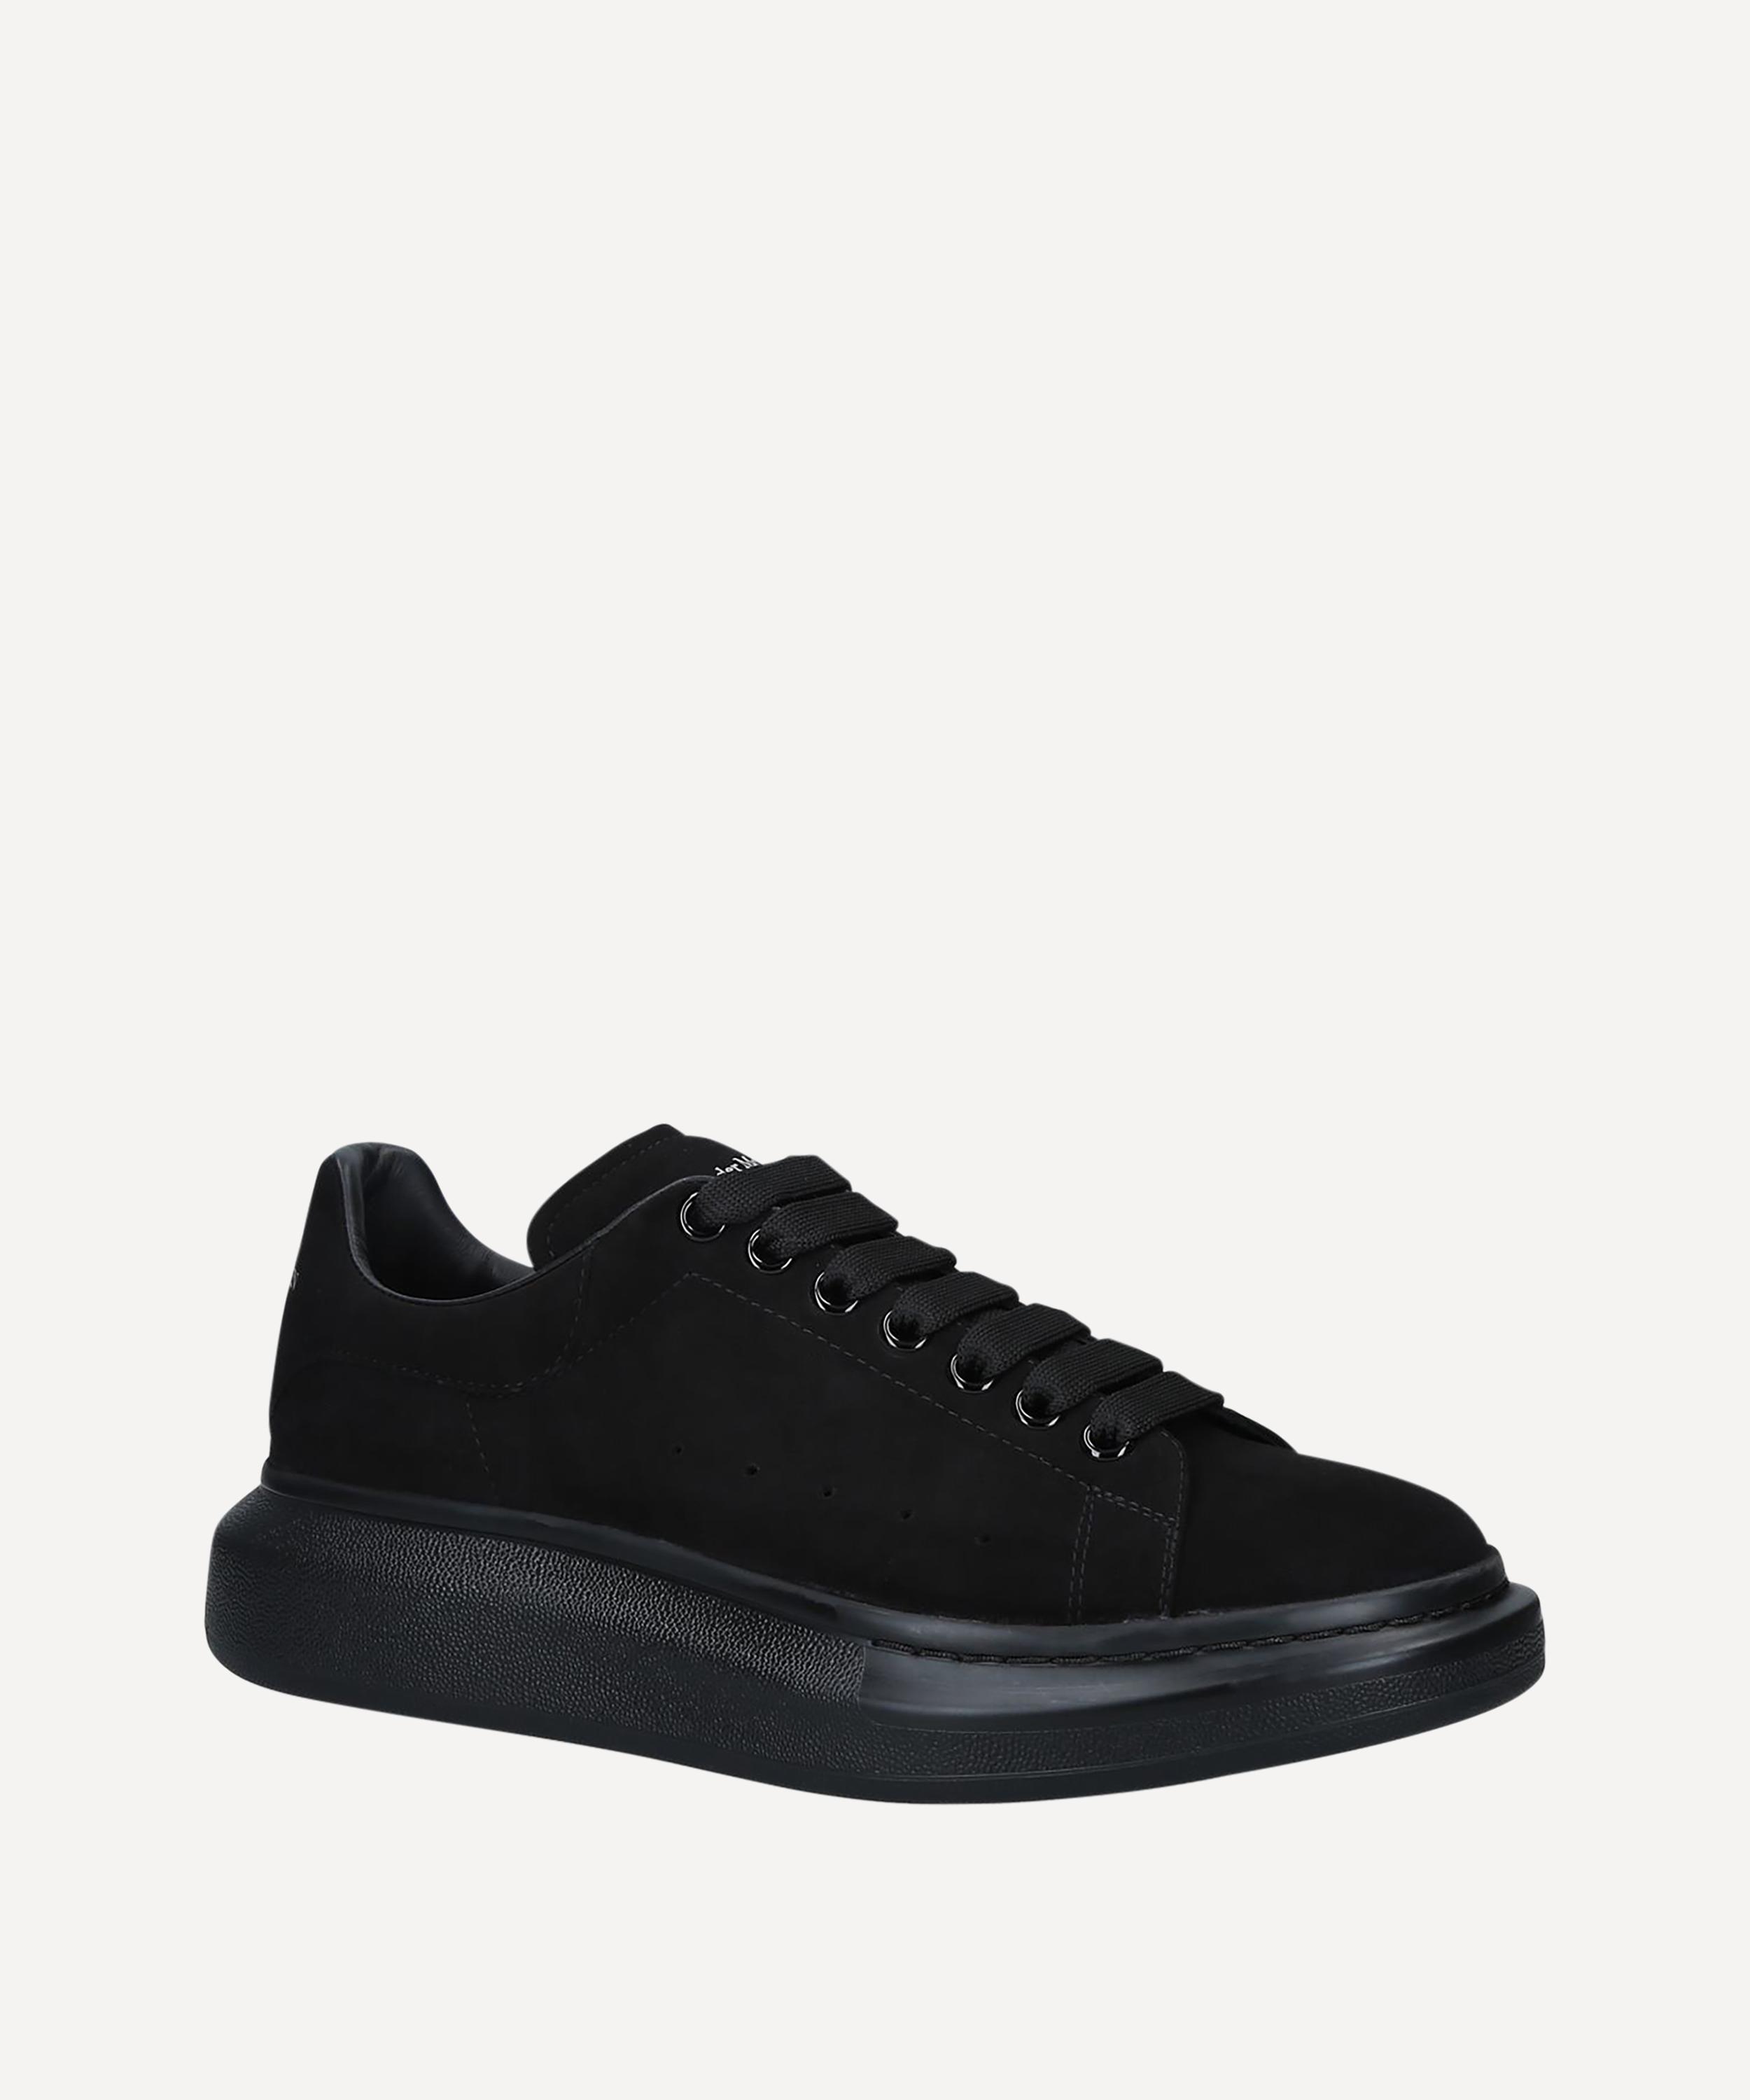 mens black and white alexander mcqueen trainers